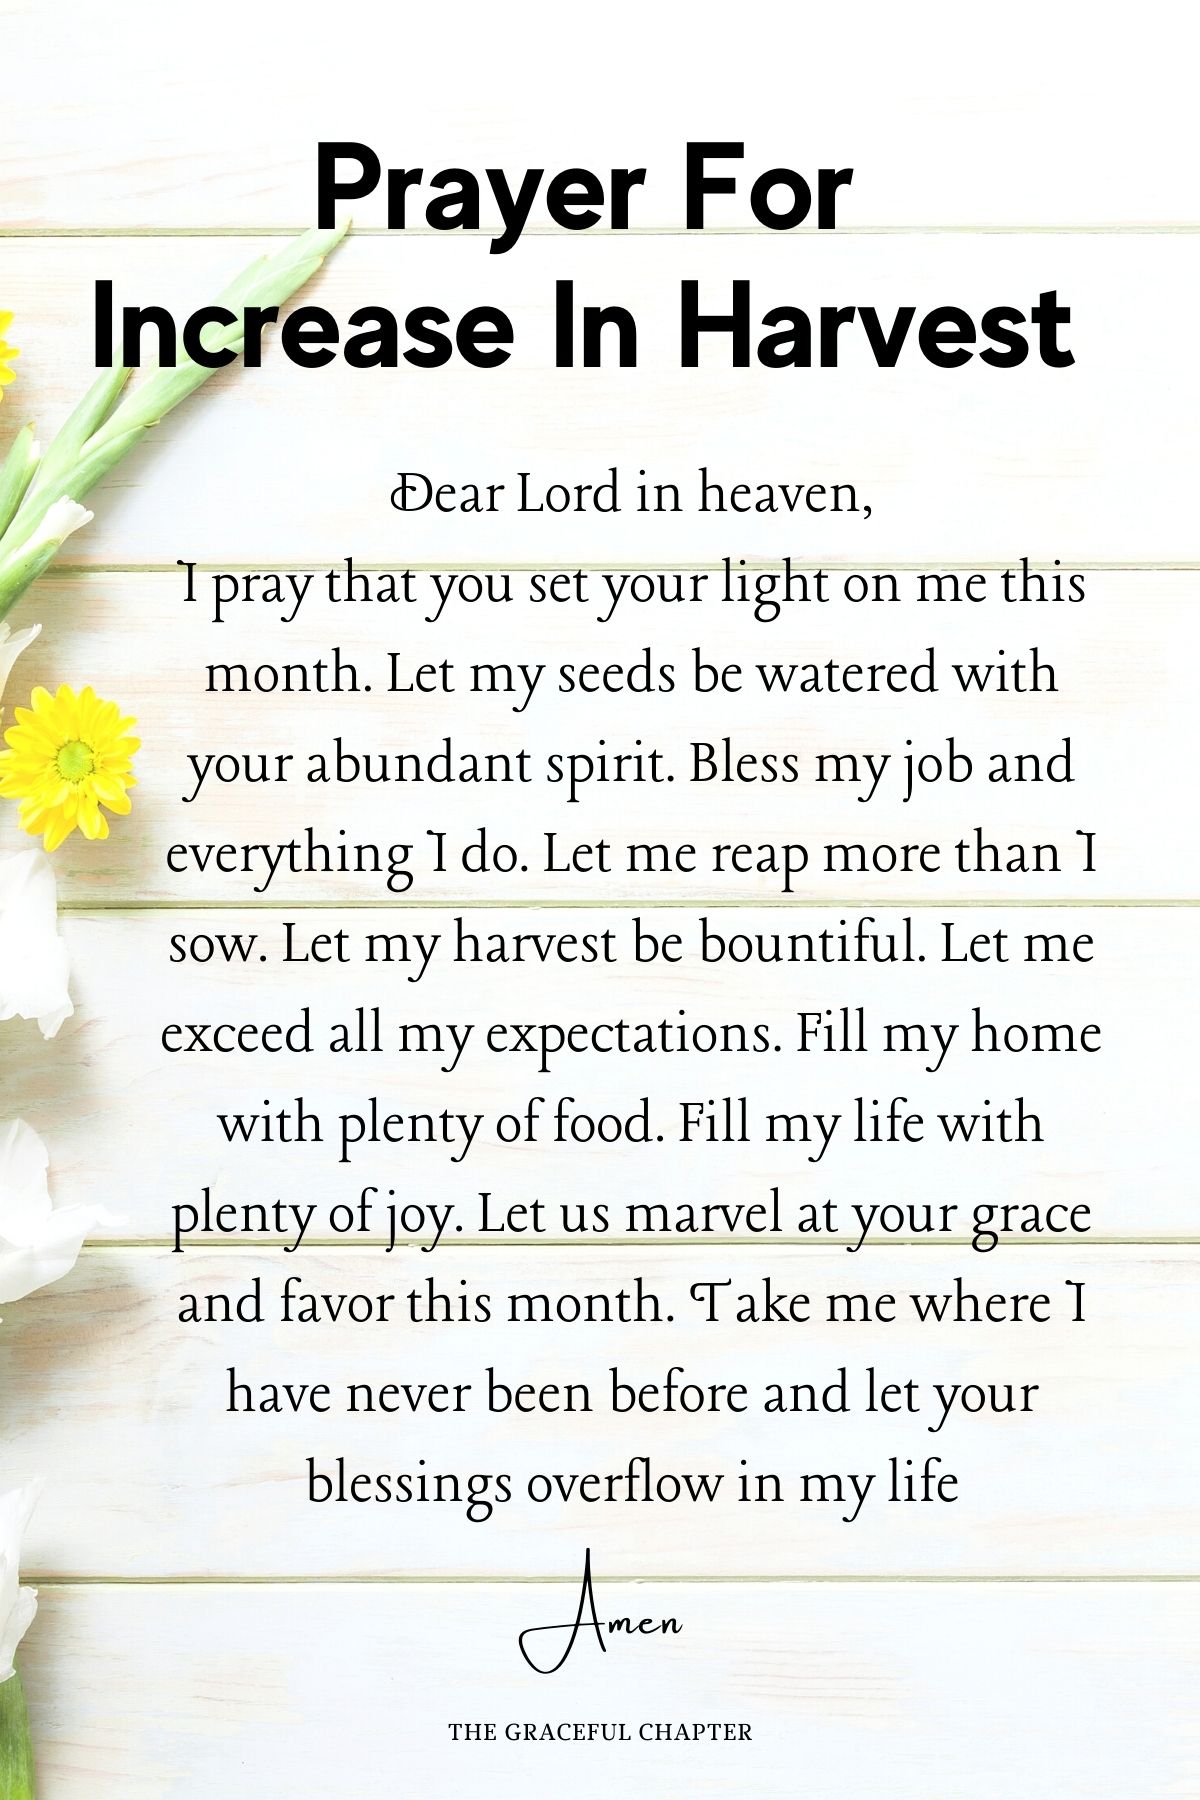 Prayer for an increase in harvest